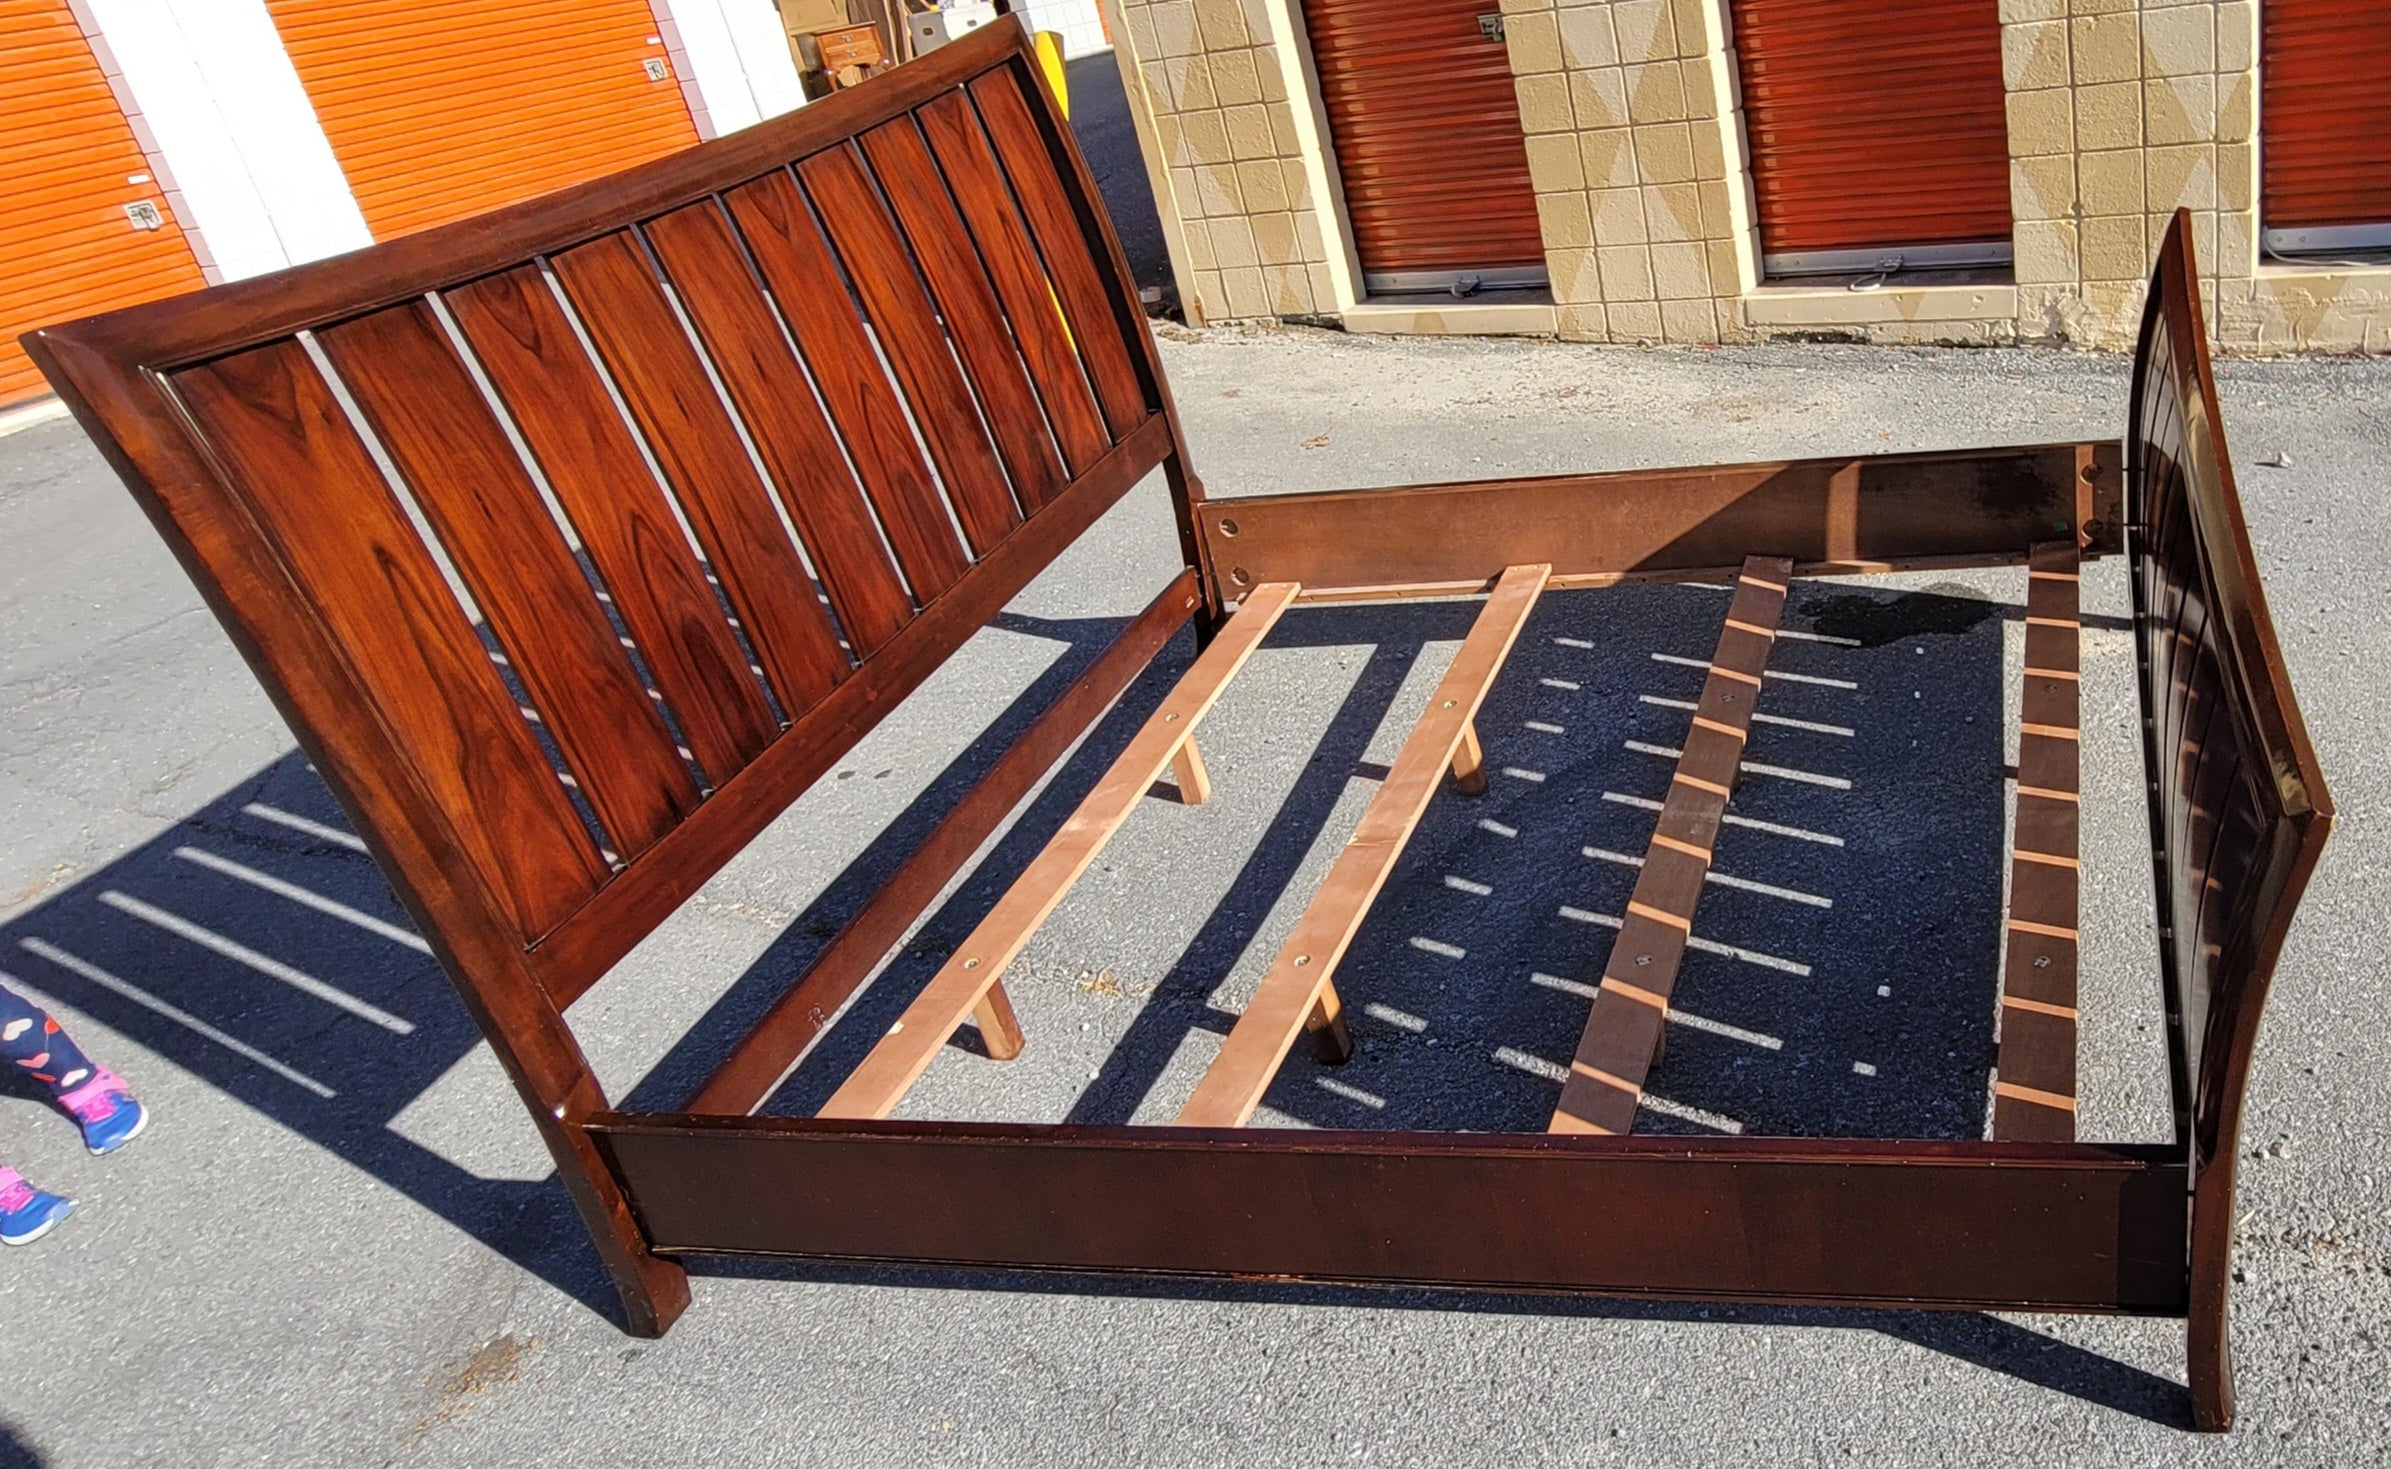 Rosewood King Size Slatted Sleigh Bed In Good Condition For Sale In Germantown, MD